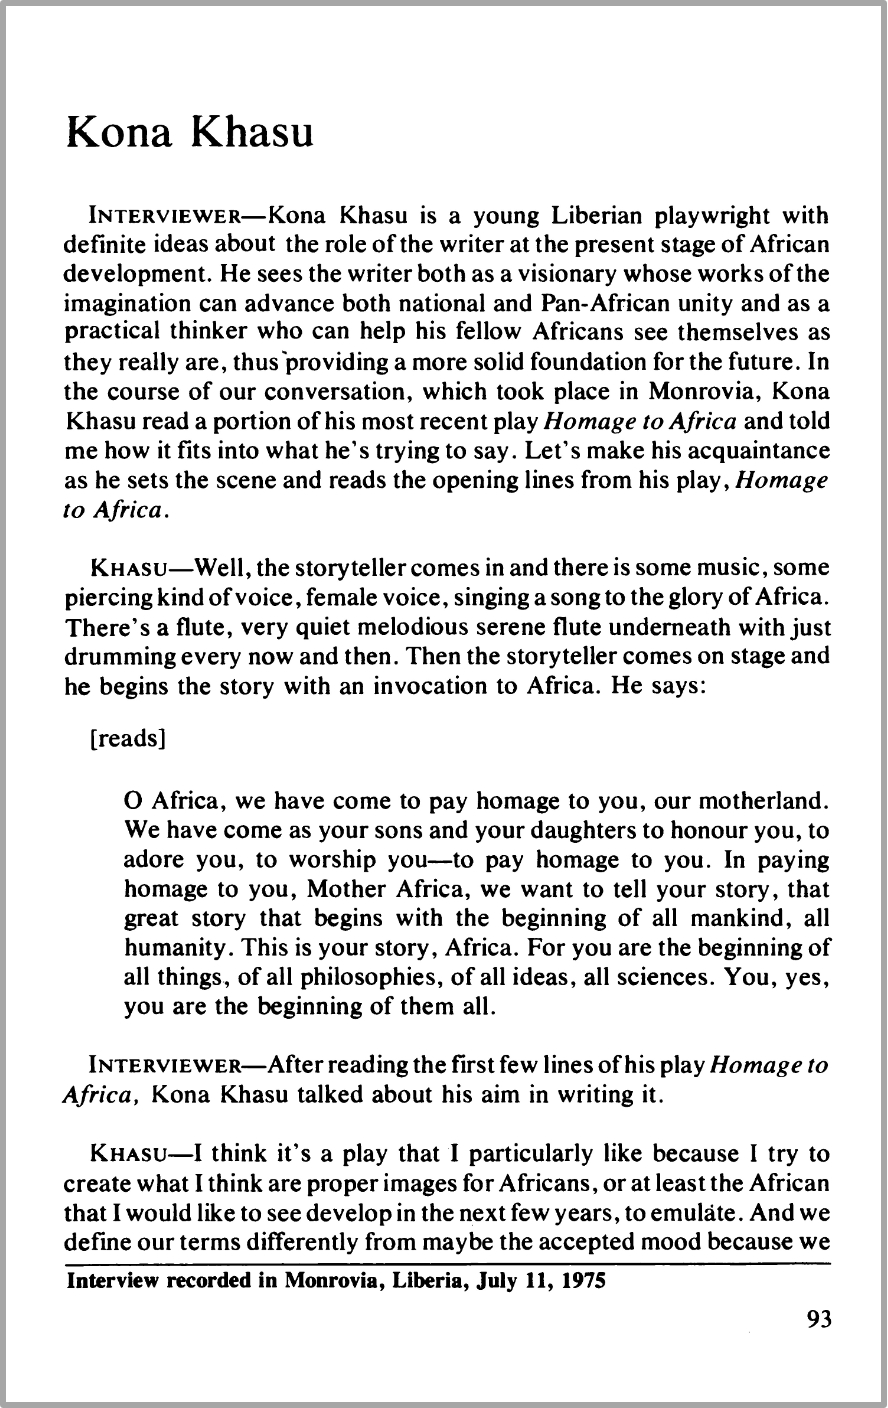 Kona Khasu, Radio Interview for "Conversations with African Writers" Series